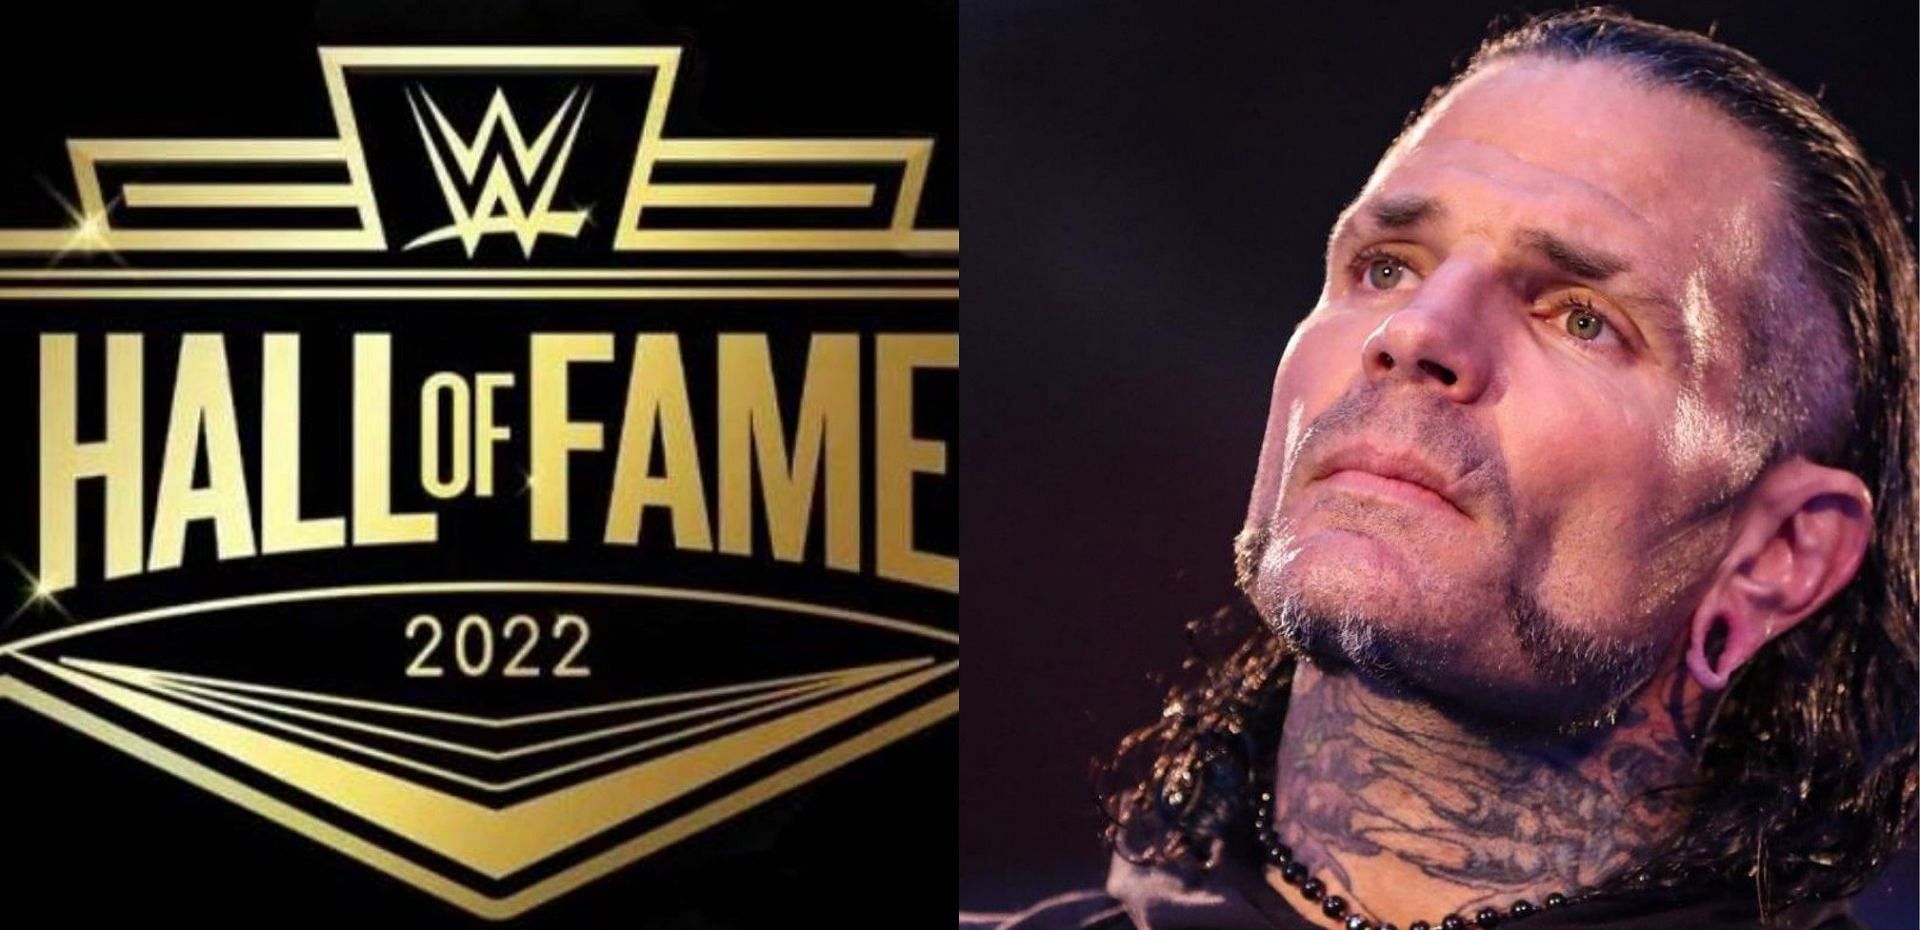 Jeff Hardy says he "cried a little bit" when WWE reached out to him for